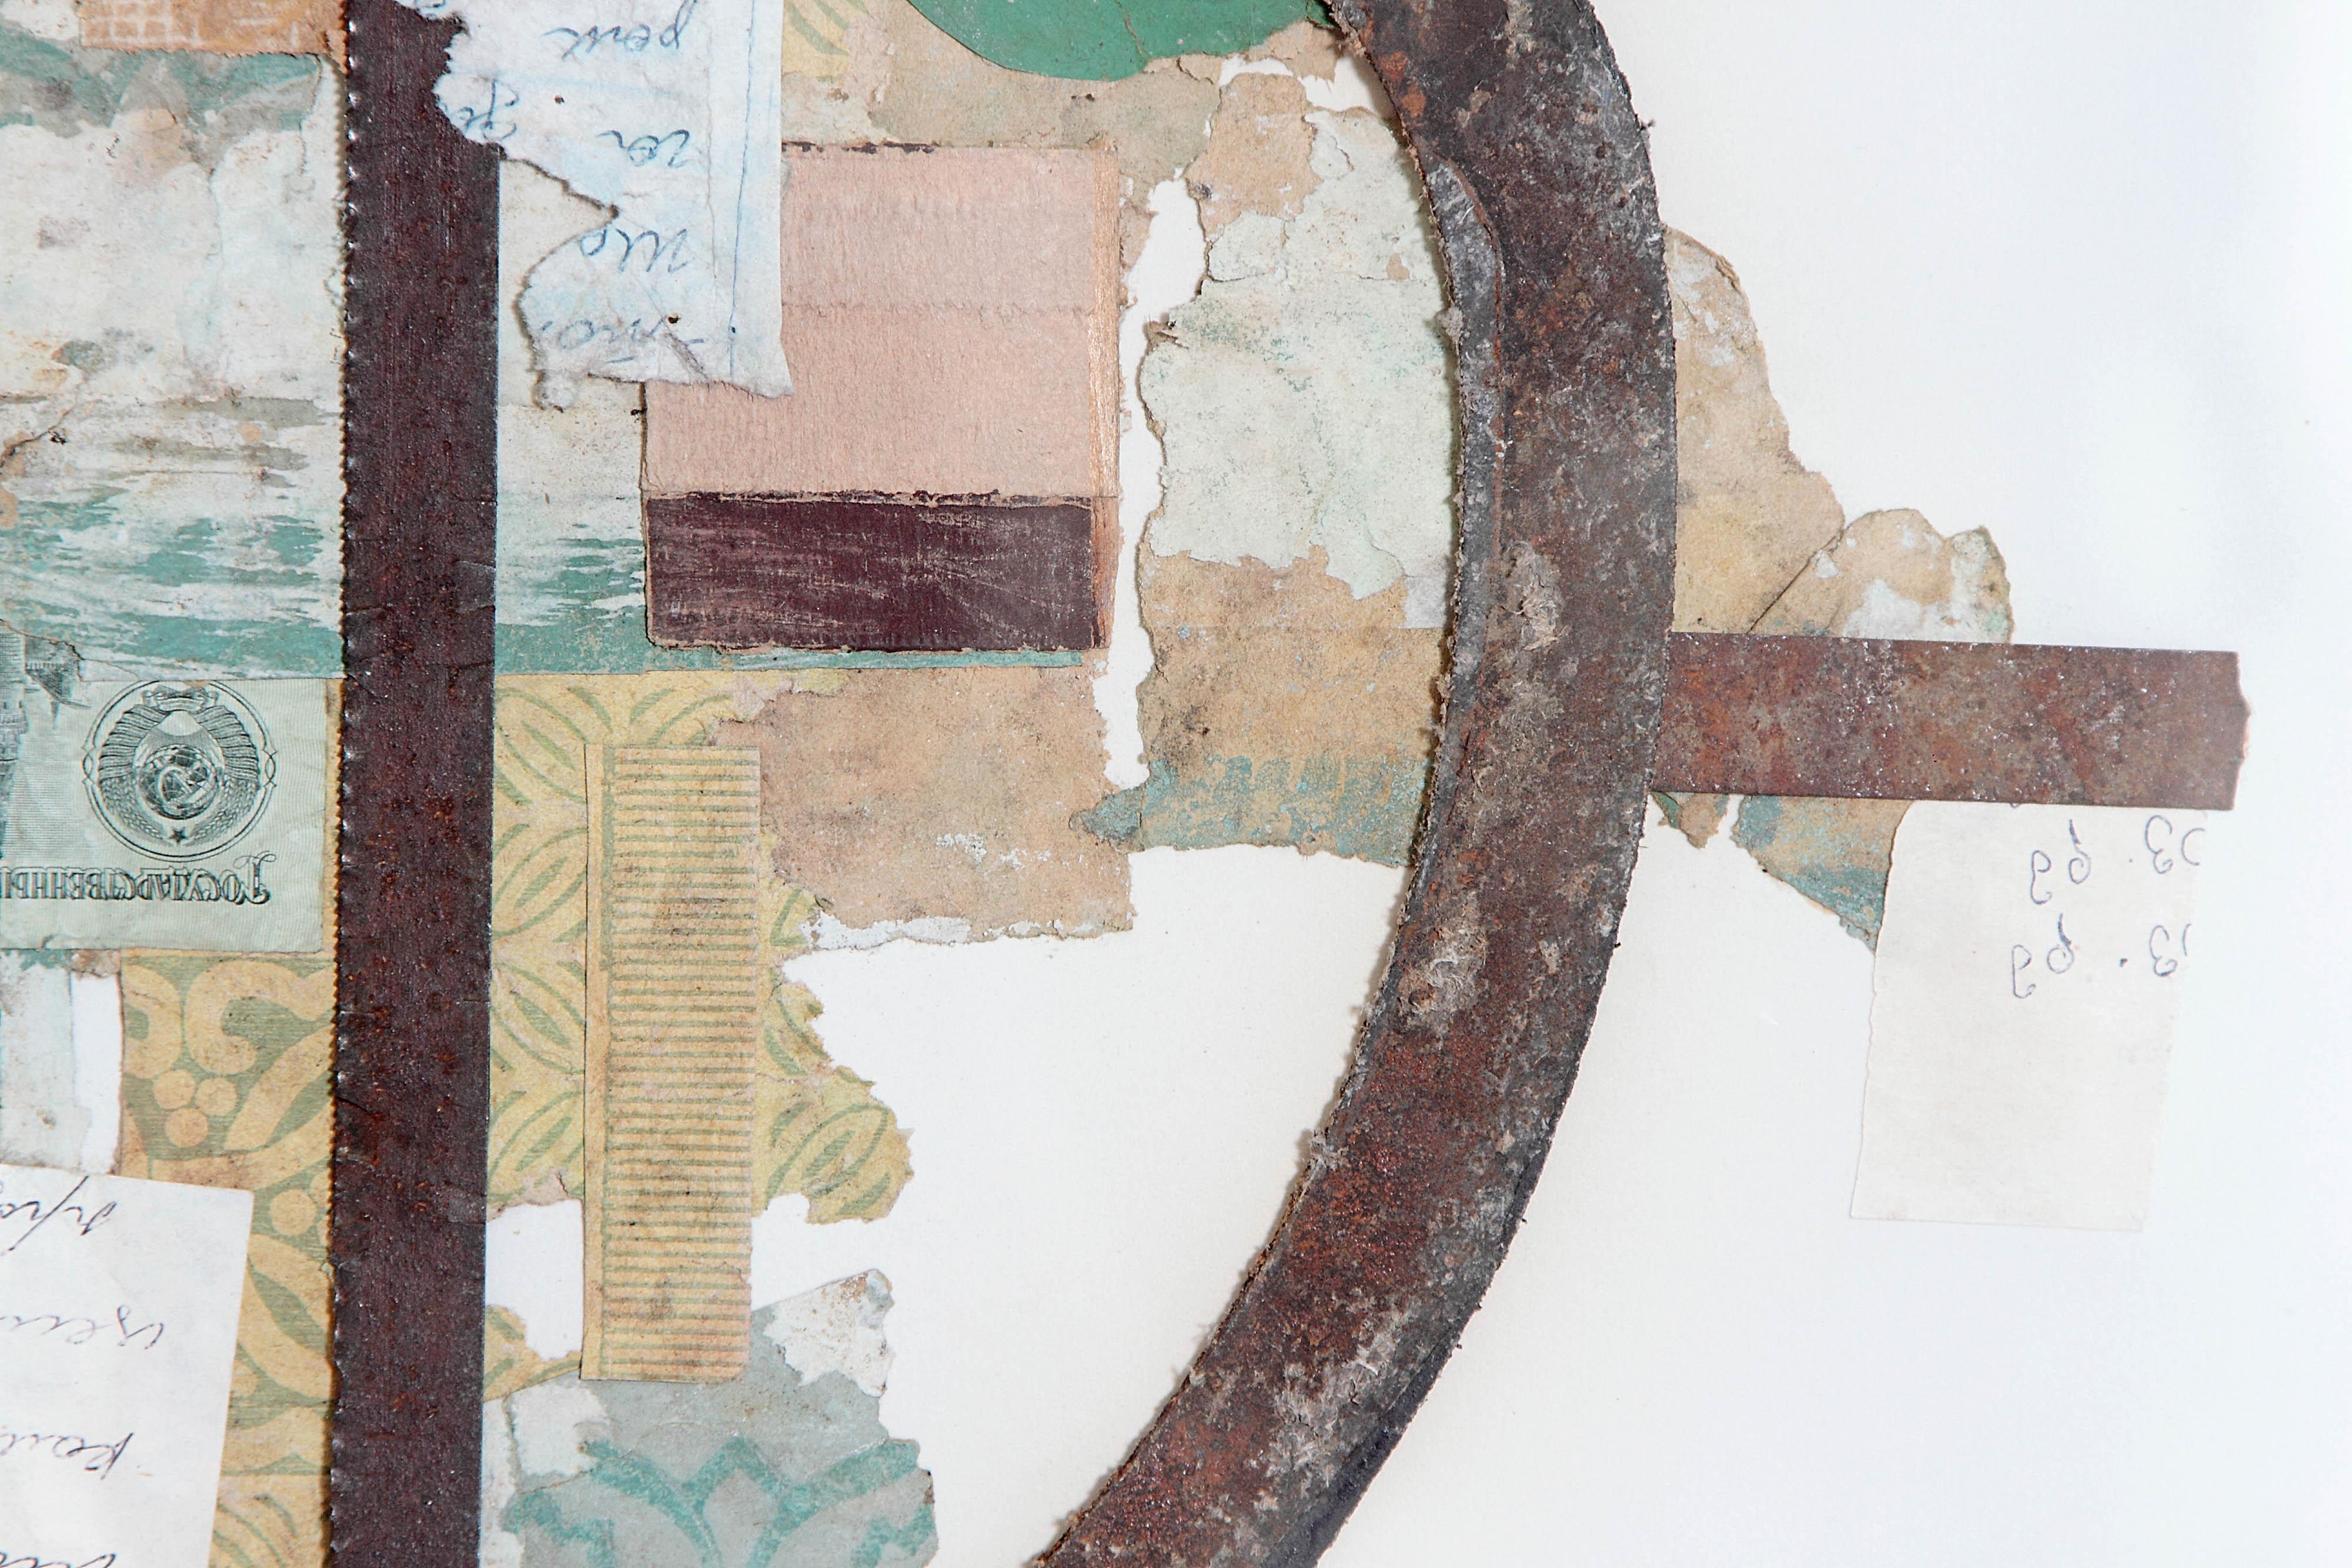 20th Century Collage Non-Objective with Mixed-Media Forms